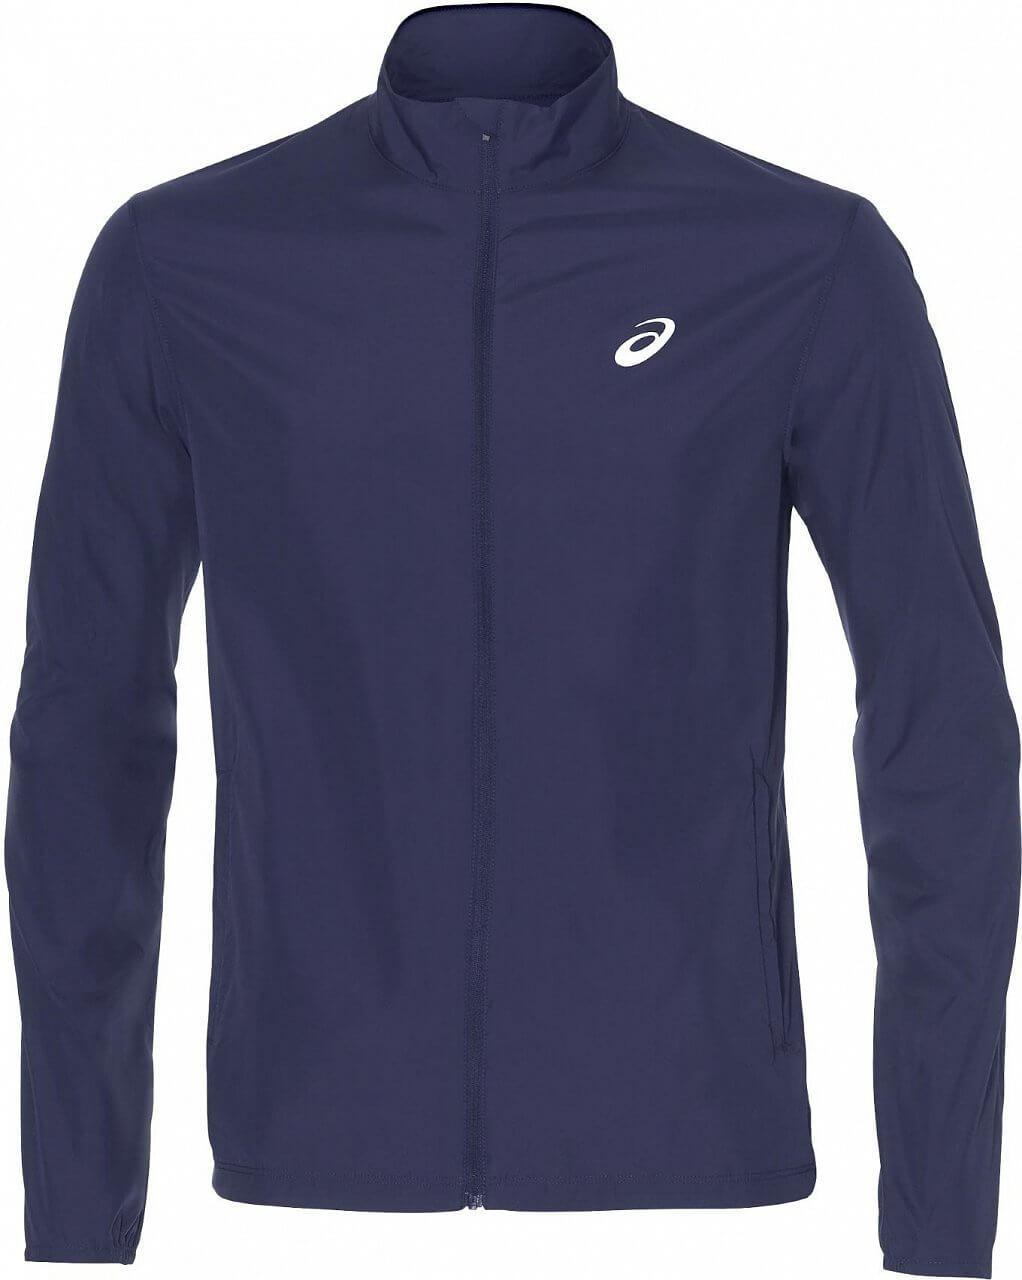 Rugby Heaven Asics Silver Mens Jacket - www.rugby-heaven.co.uk